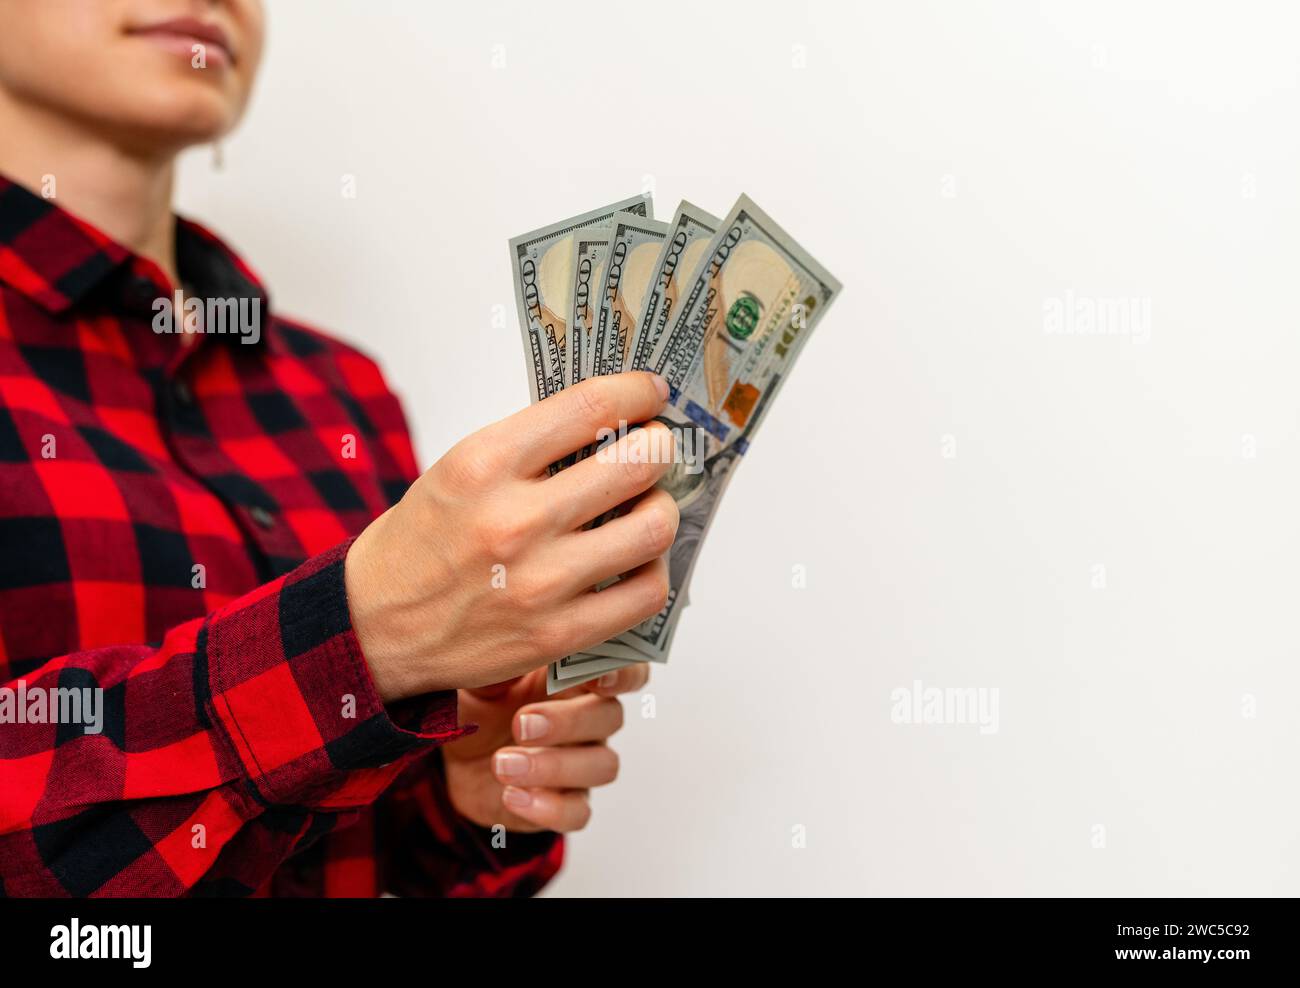 Female person in red casual shirt holds 100 dollar bills in hand in front of plain background with copy space. Stock Photo